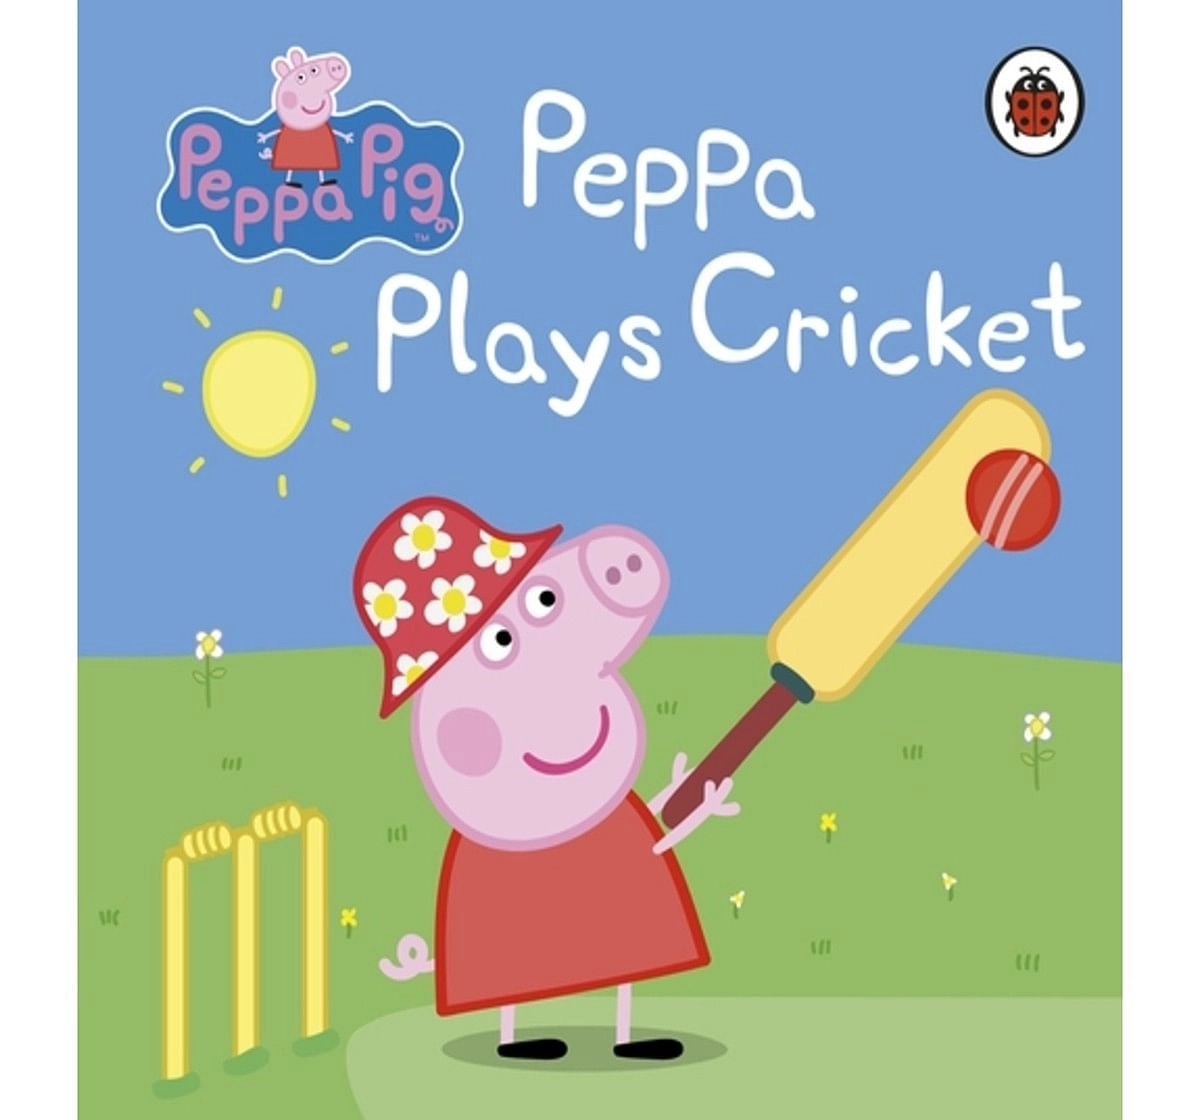 Peppa Pig: Peppa Plays Cricket, 16 Pages Book by Ladybird, Board Book